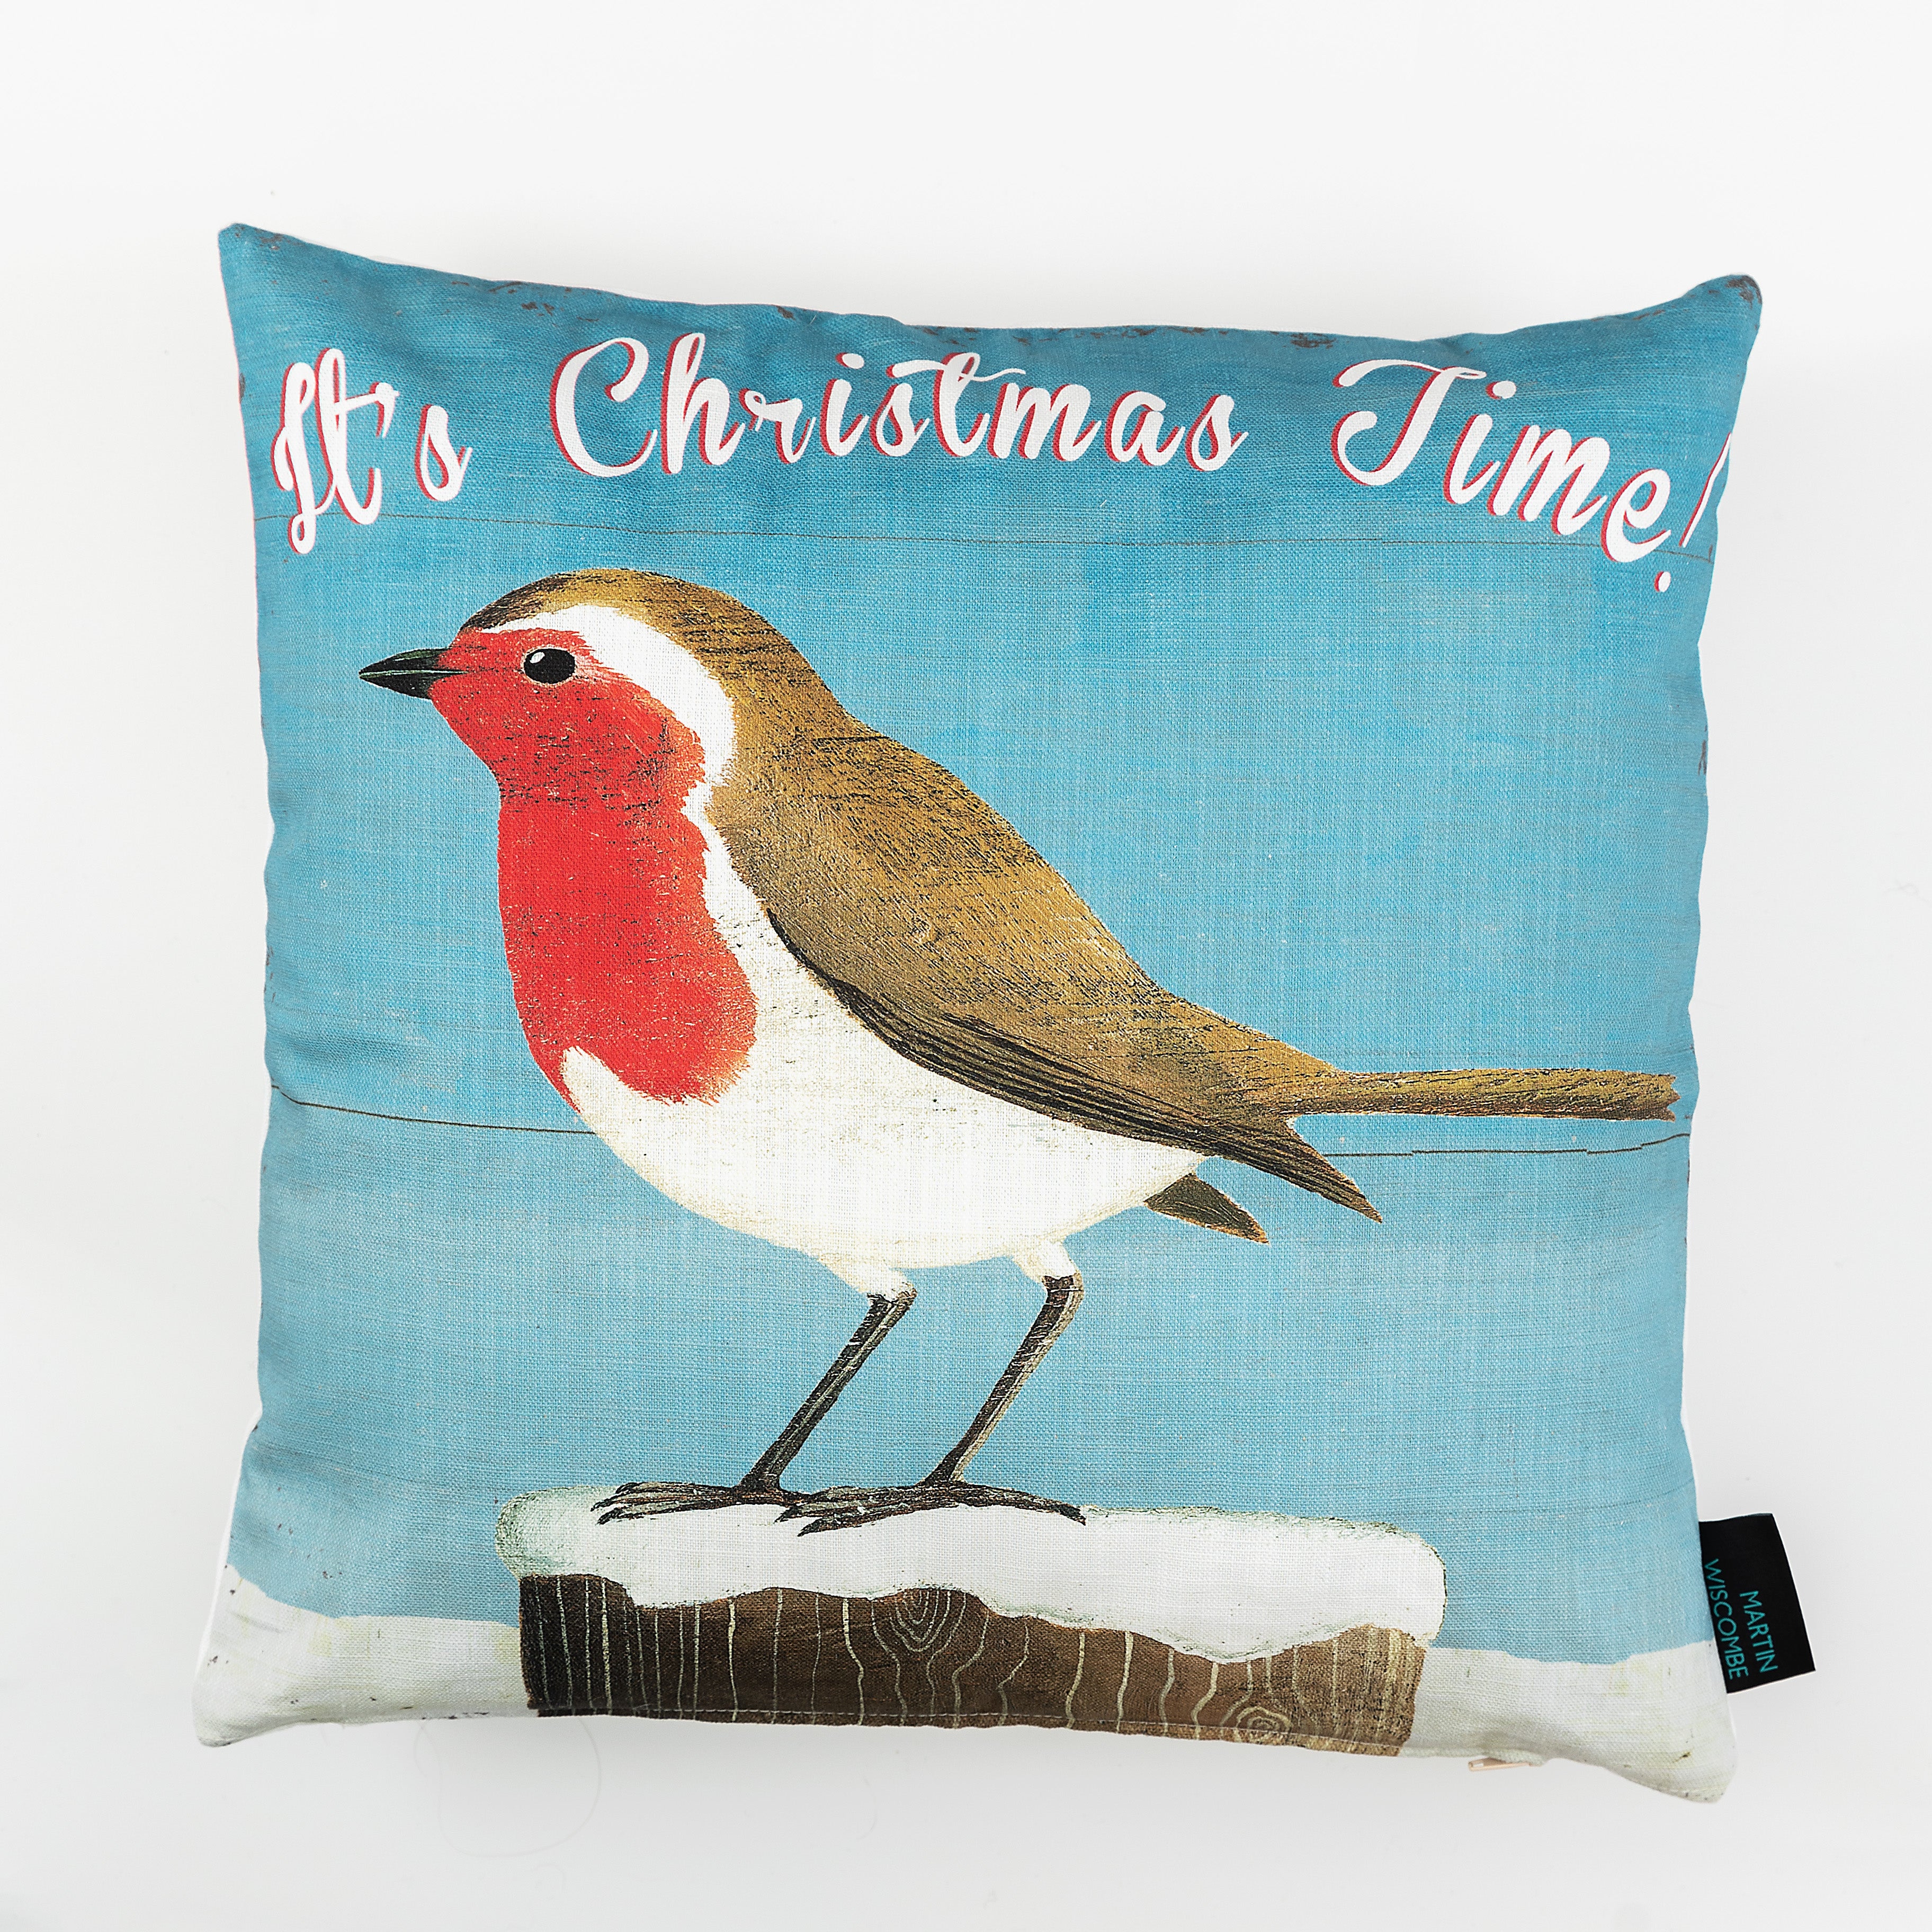 A cushion with illustrated robin in the snow on a blue background, with the words 'It's Christmas Time!' across the top.